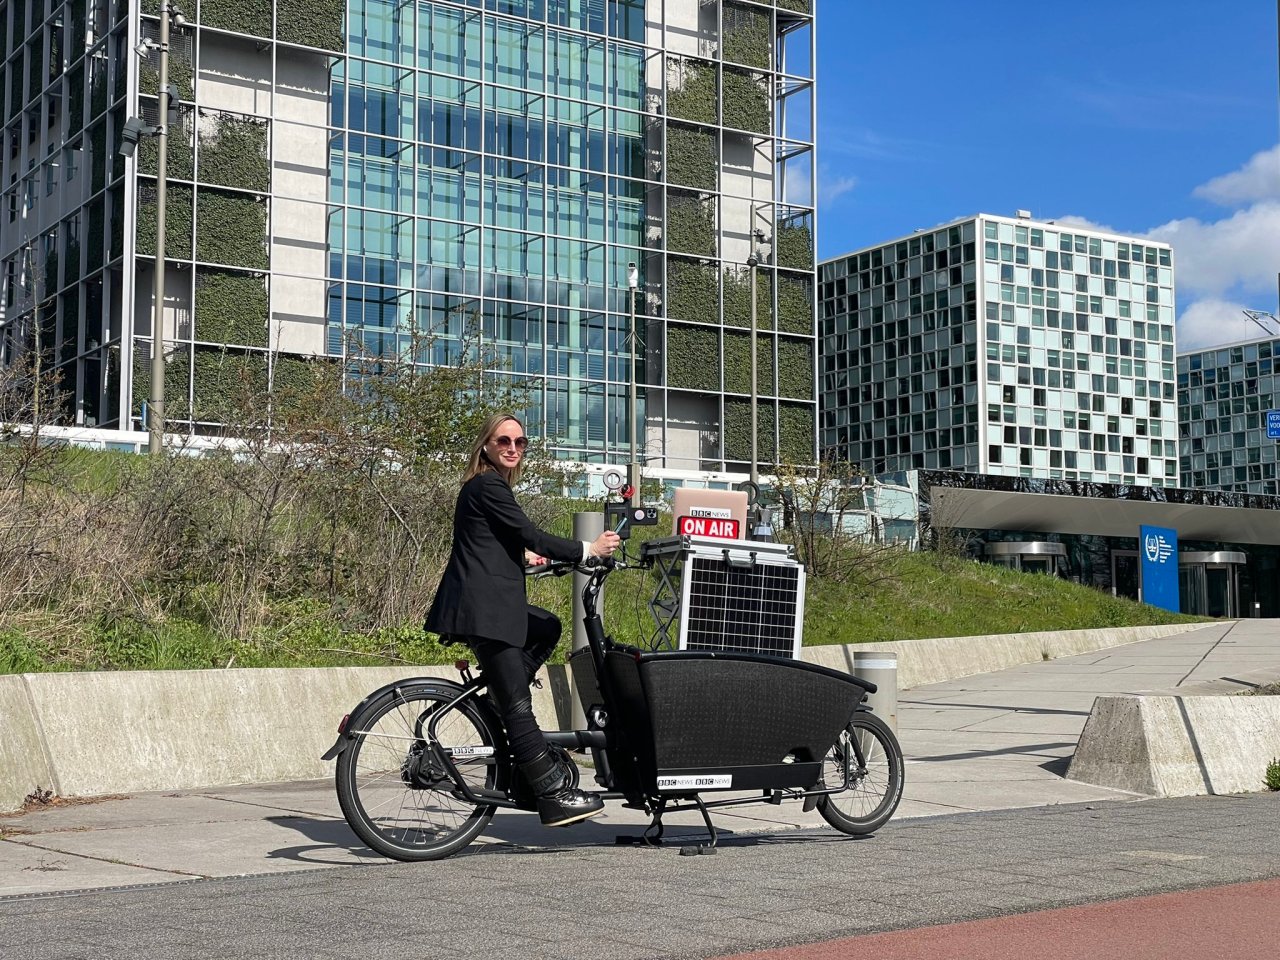 BBC's Anna Holligan with her rolling broadcast studio in the Netherlands